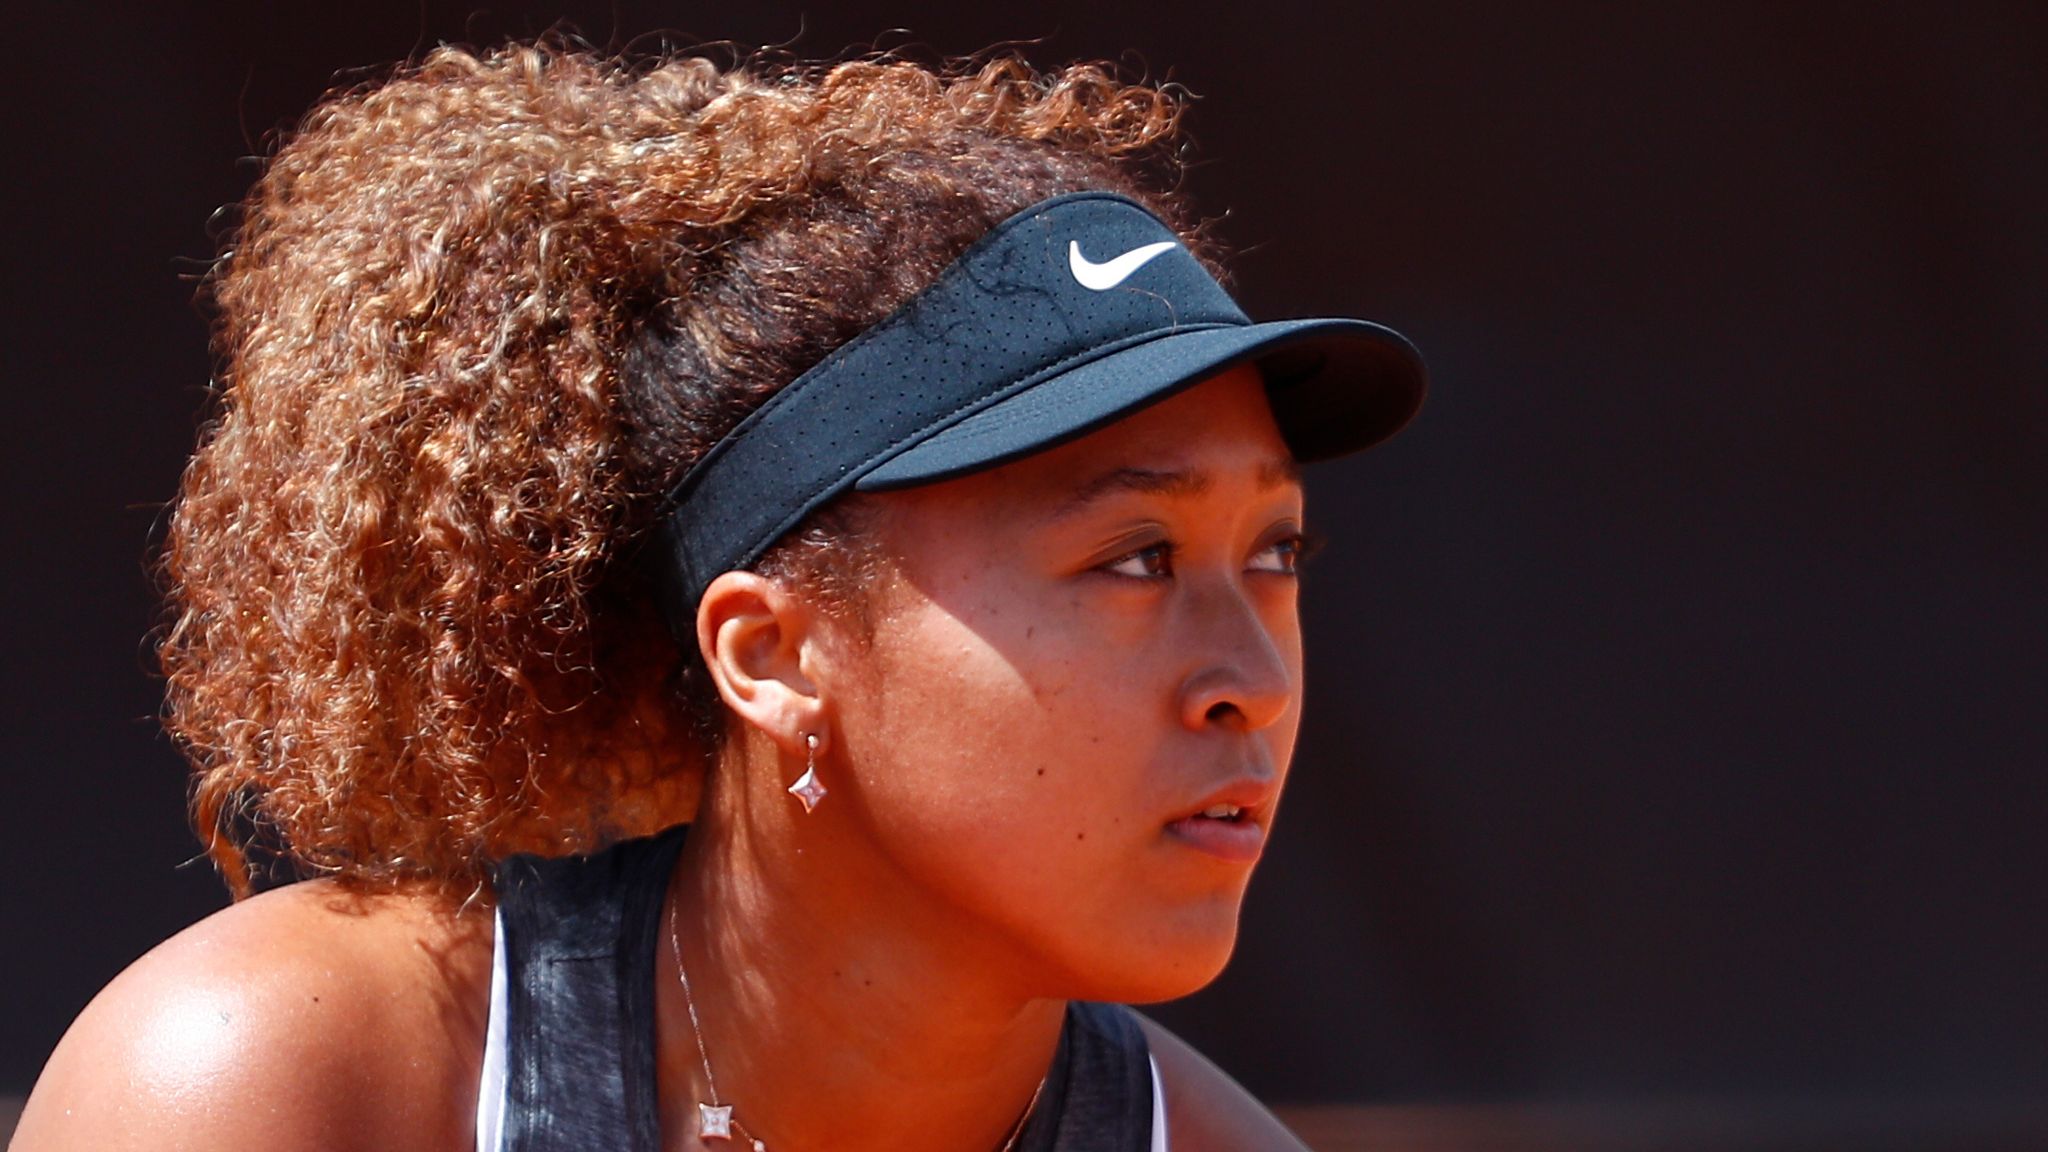 Naomi Osaka leaves the French Open and opens a necessary